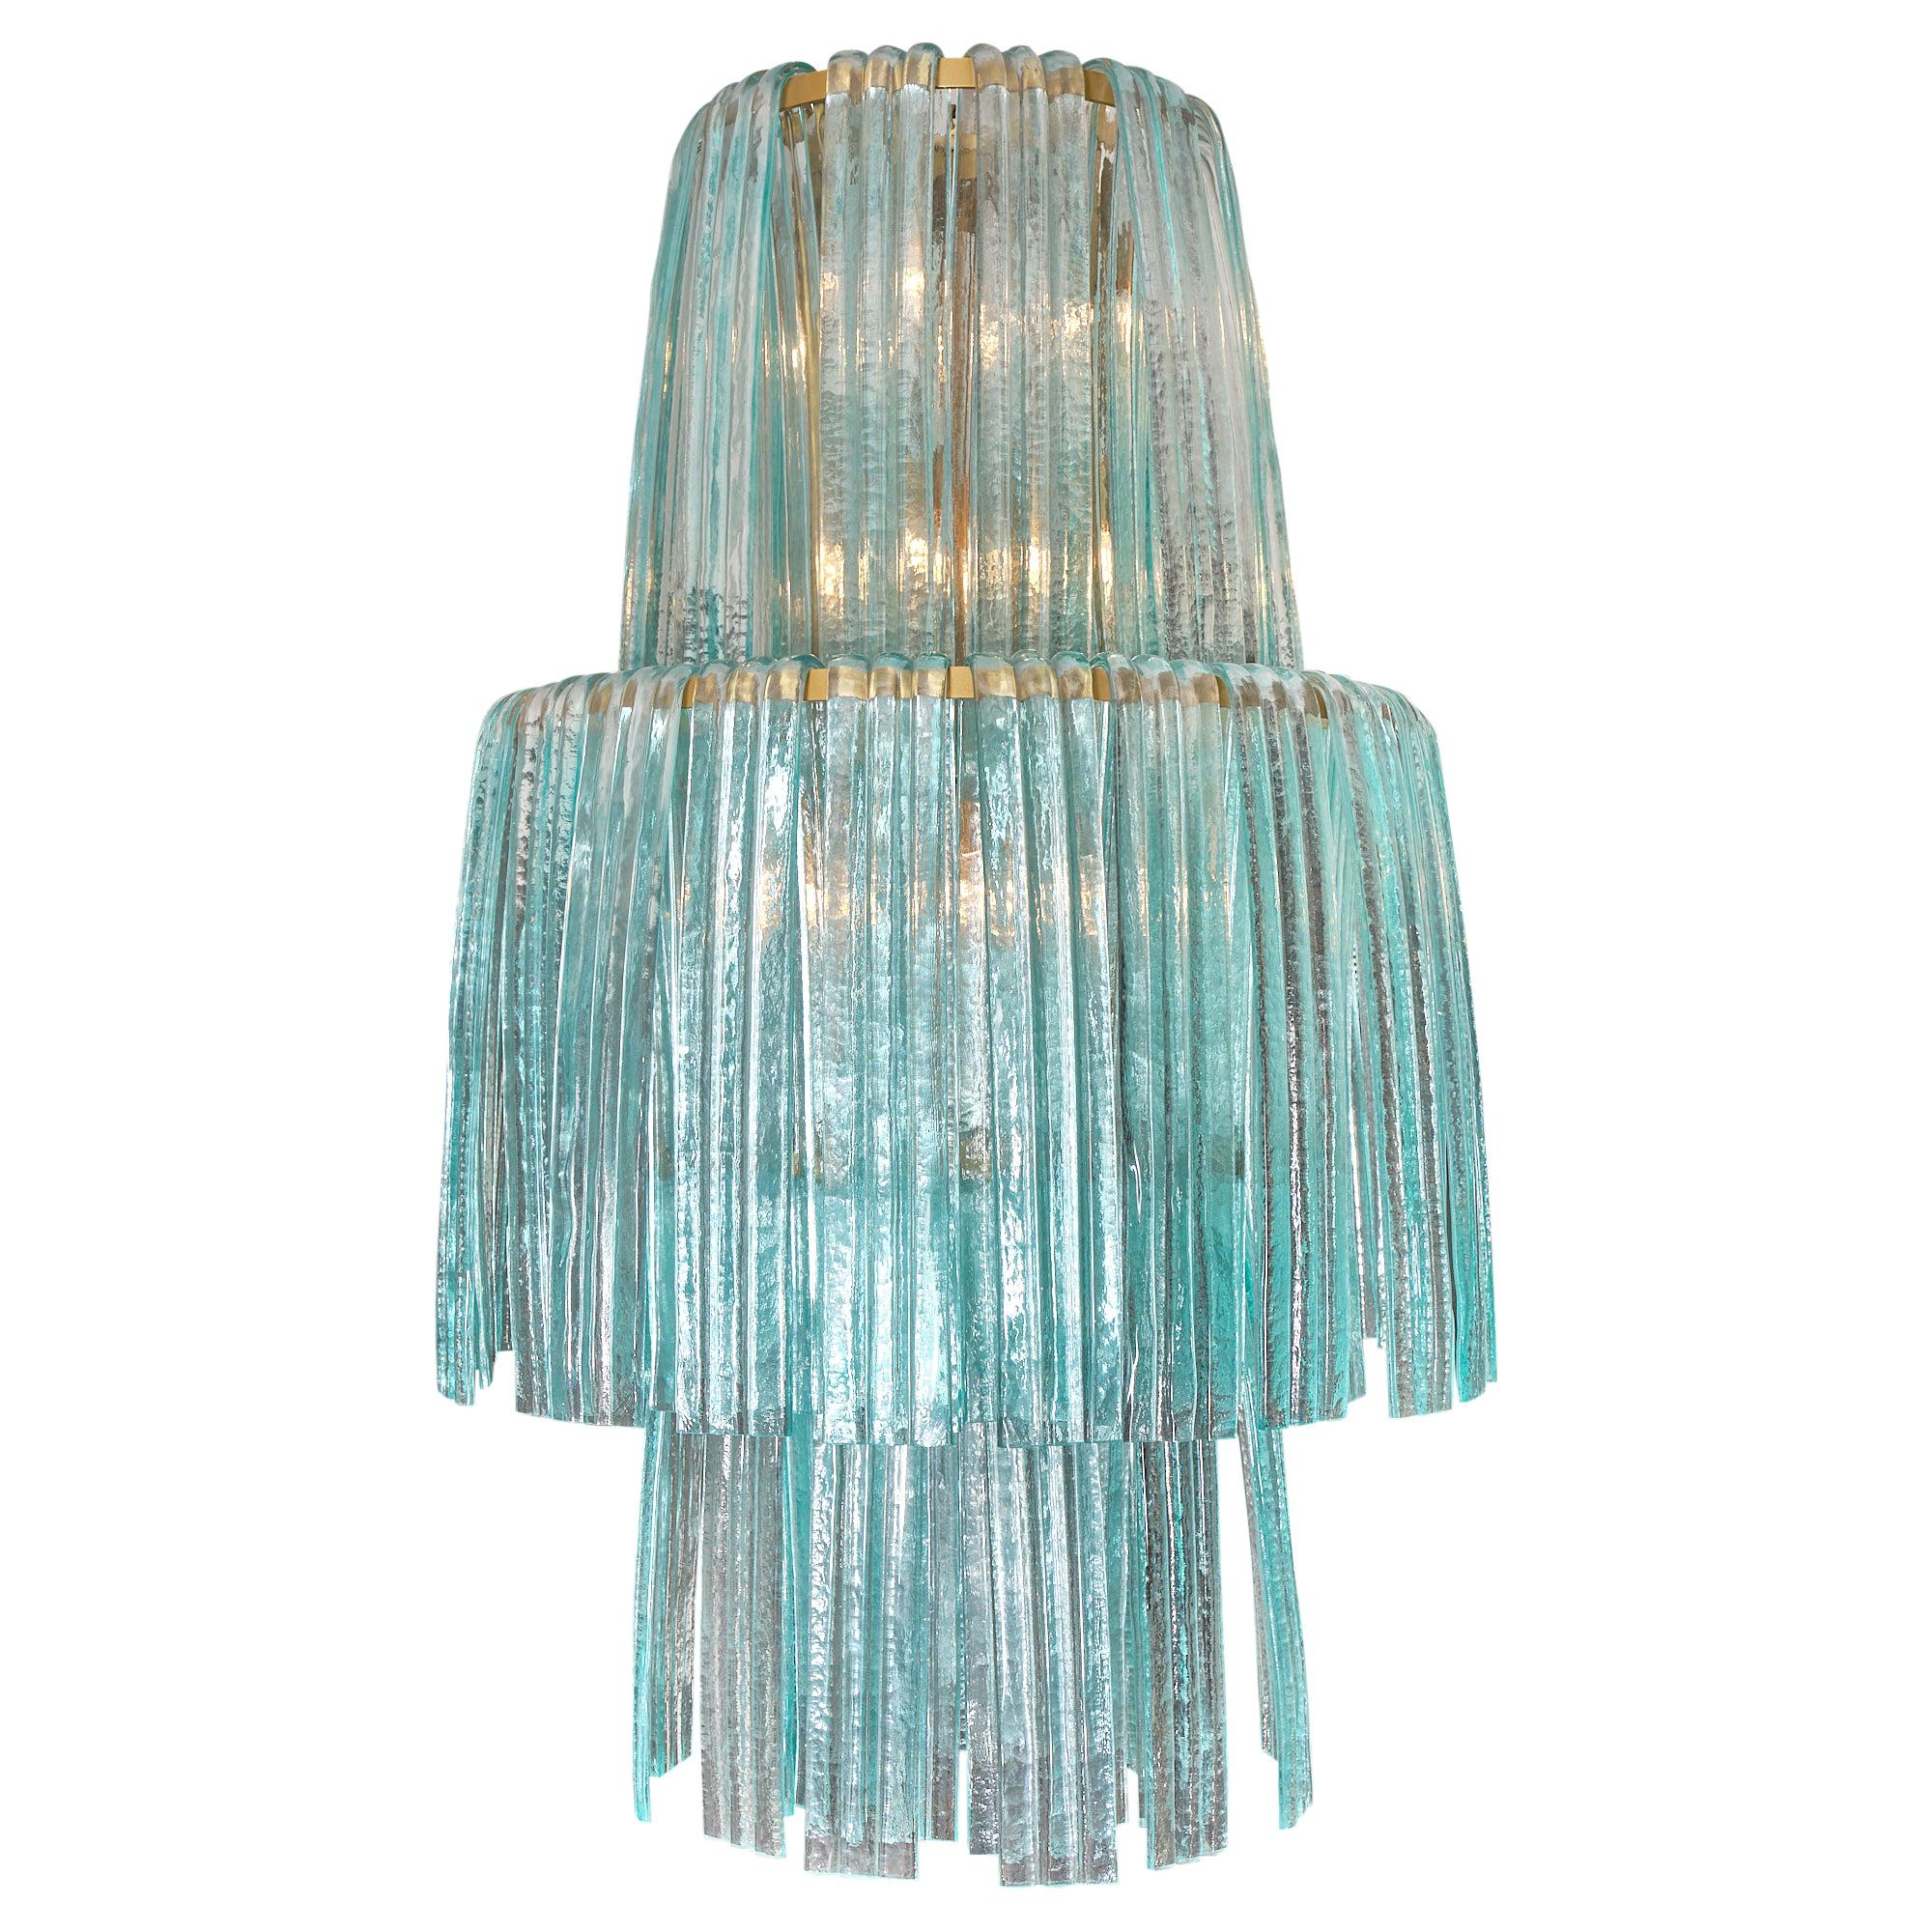 Murano Glass “Forcine” Chandelier For Sale